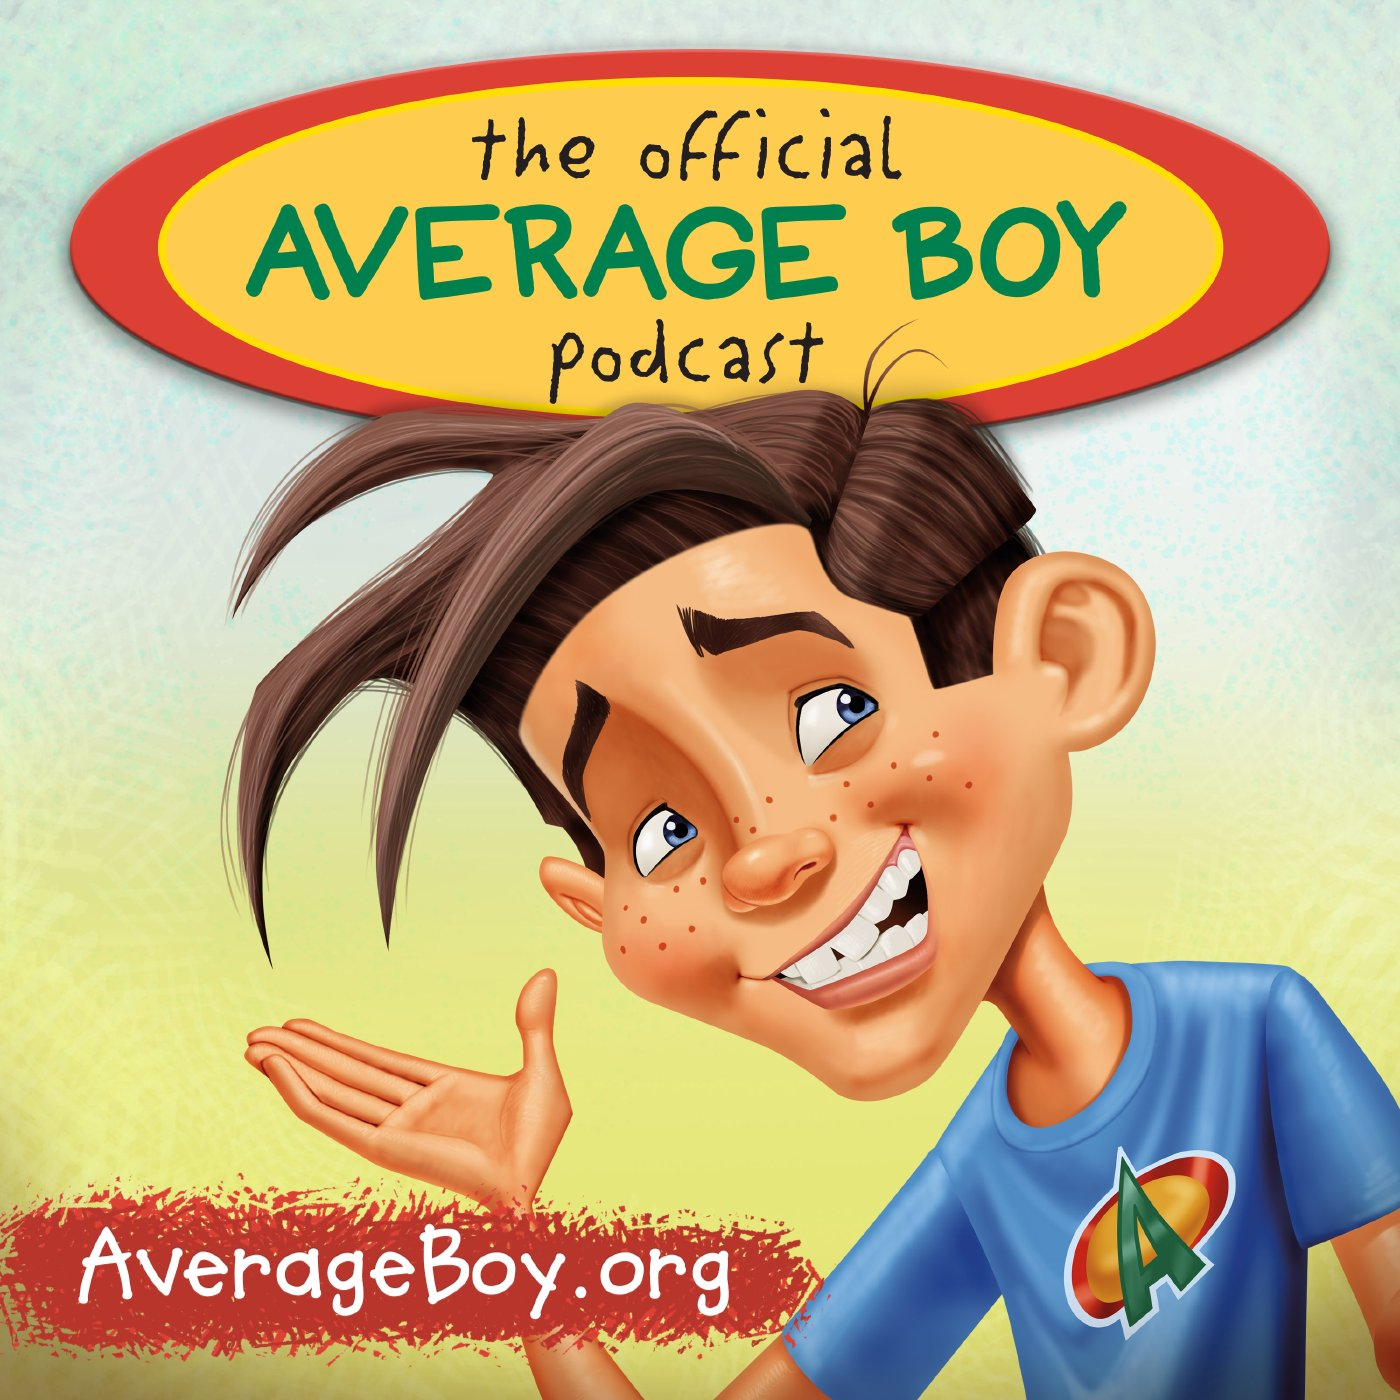 The Official Average Boy Podcast Episode 1